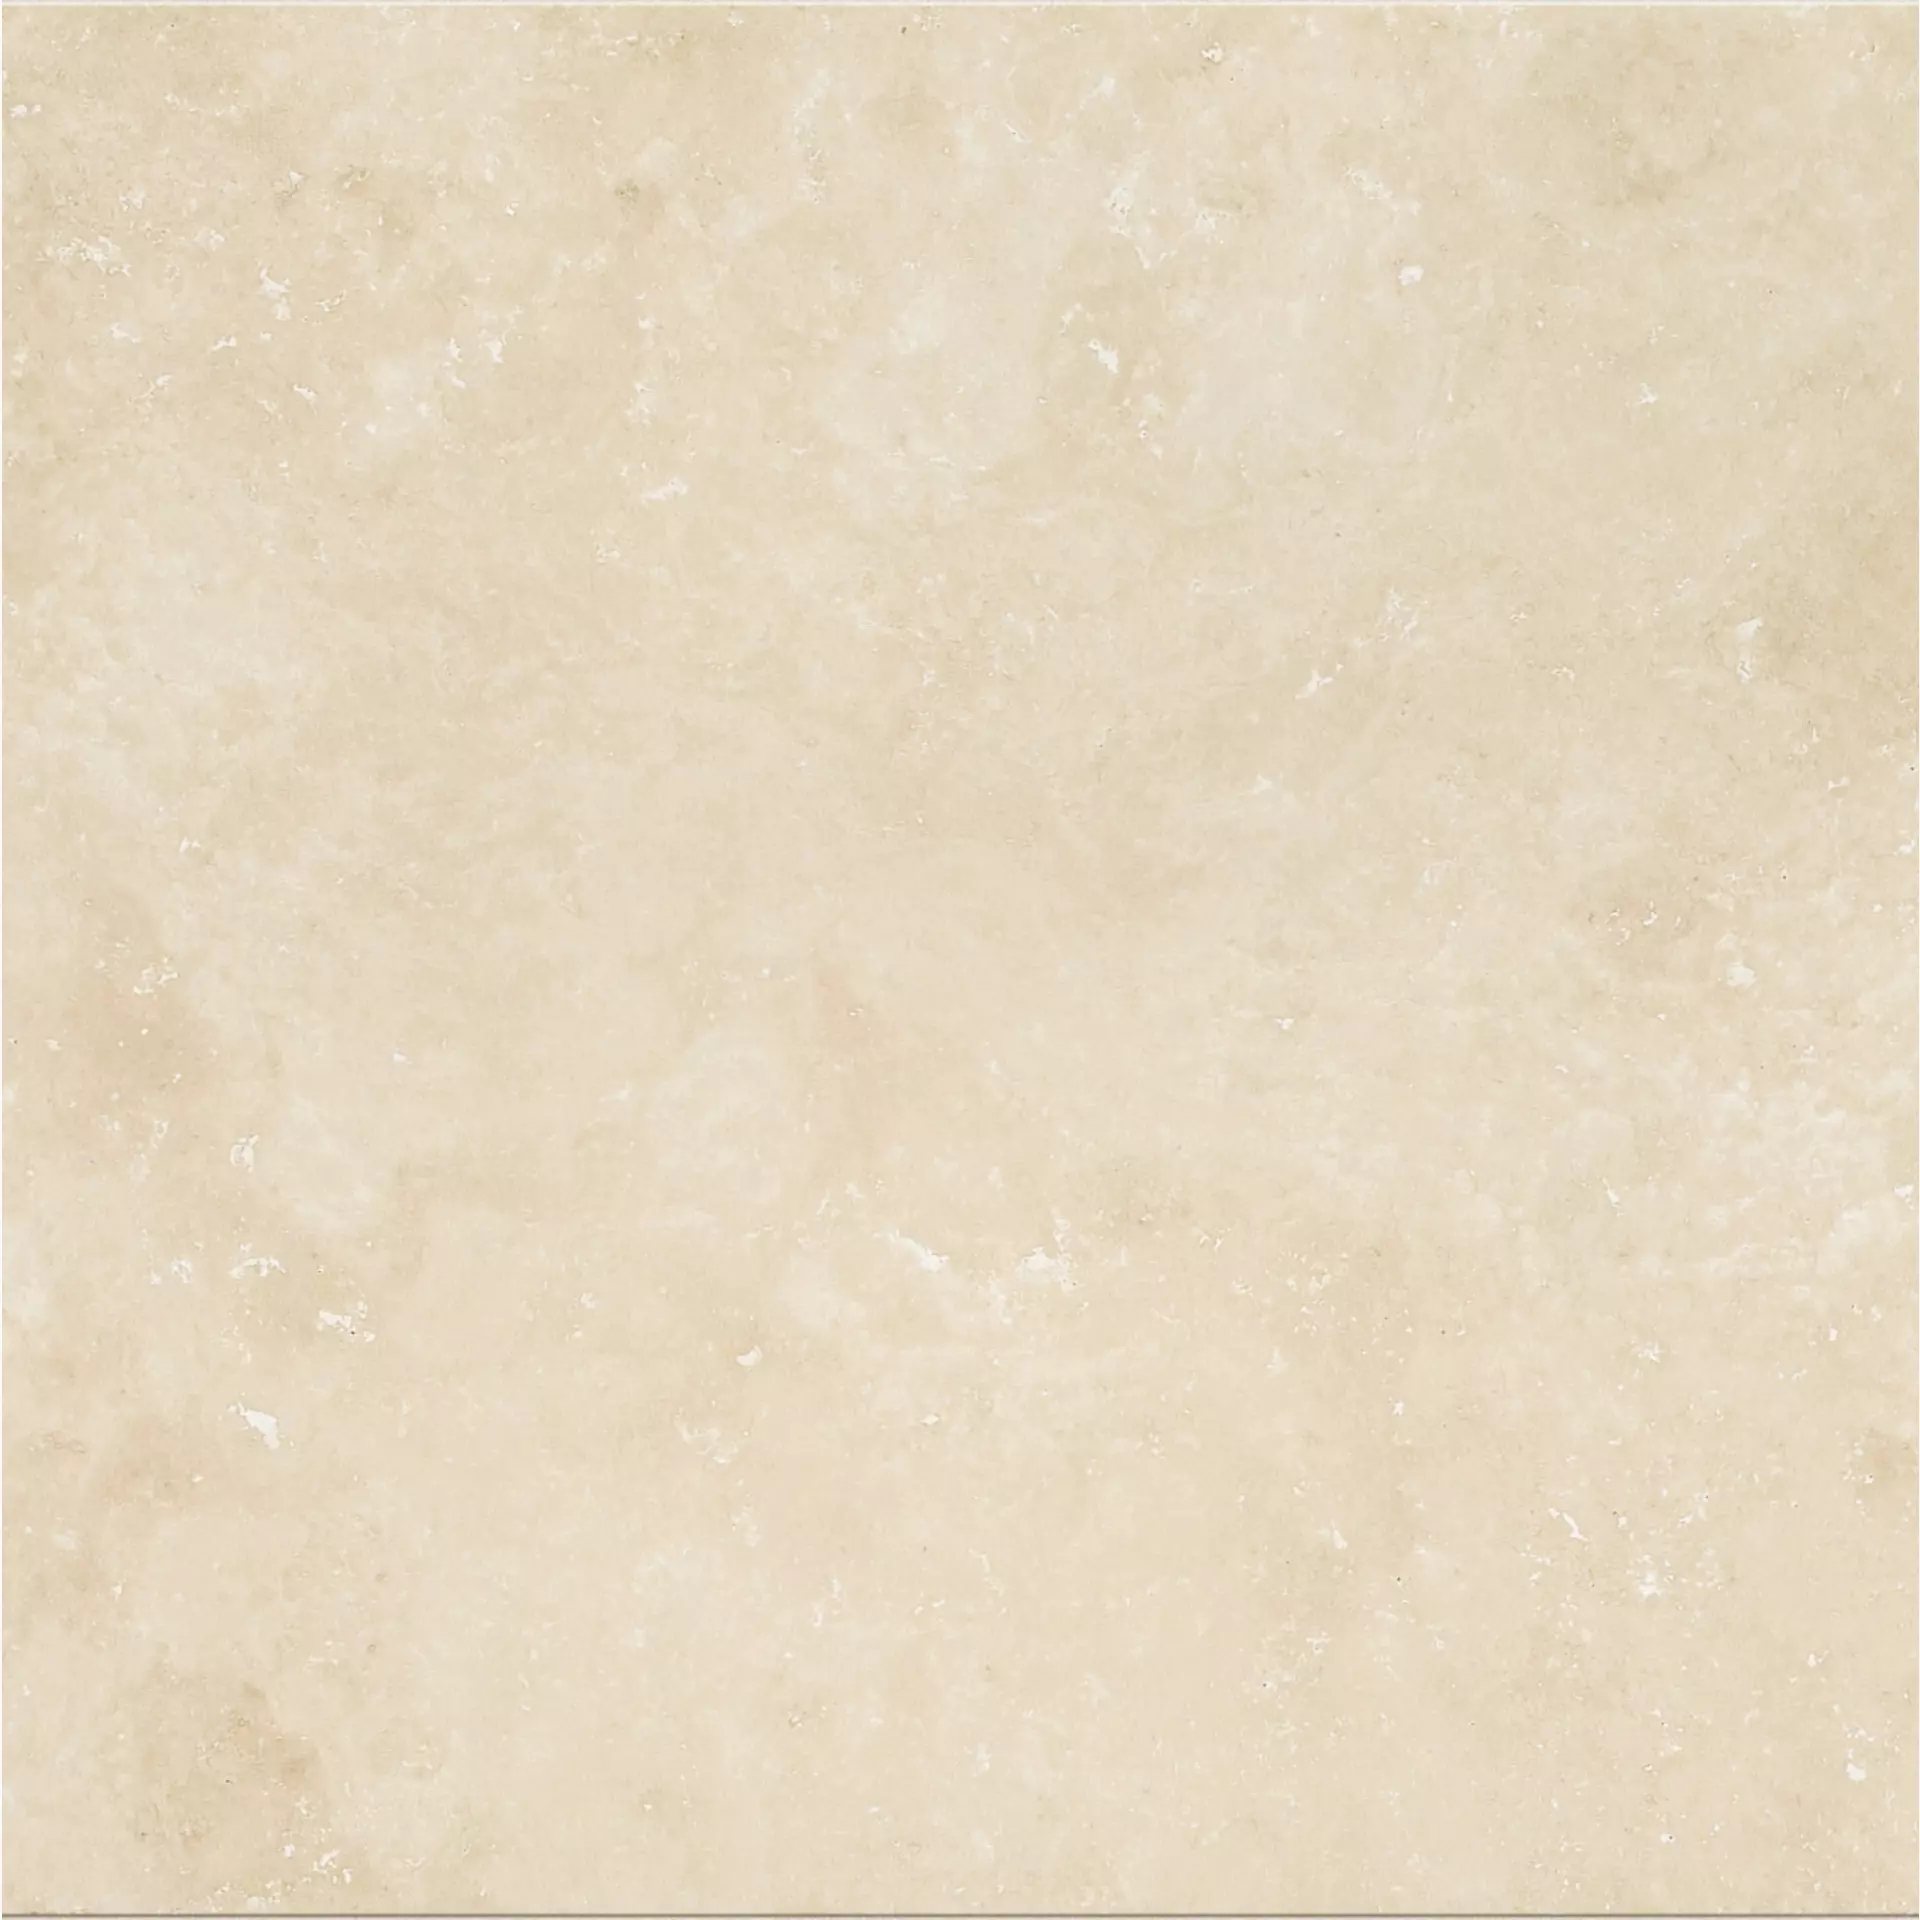 Florim Timeless Marfil Lucido 746854 60x60cm rectified 9mm